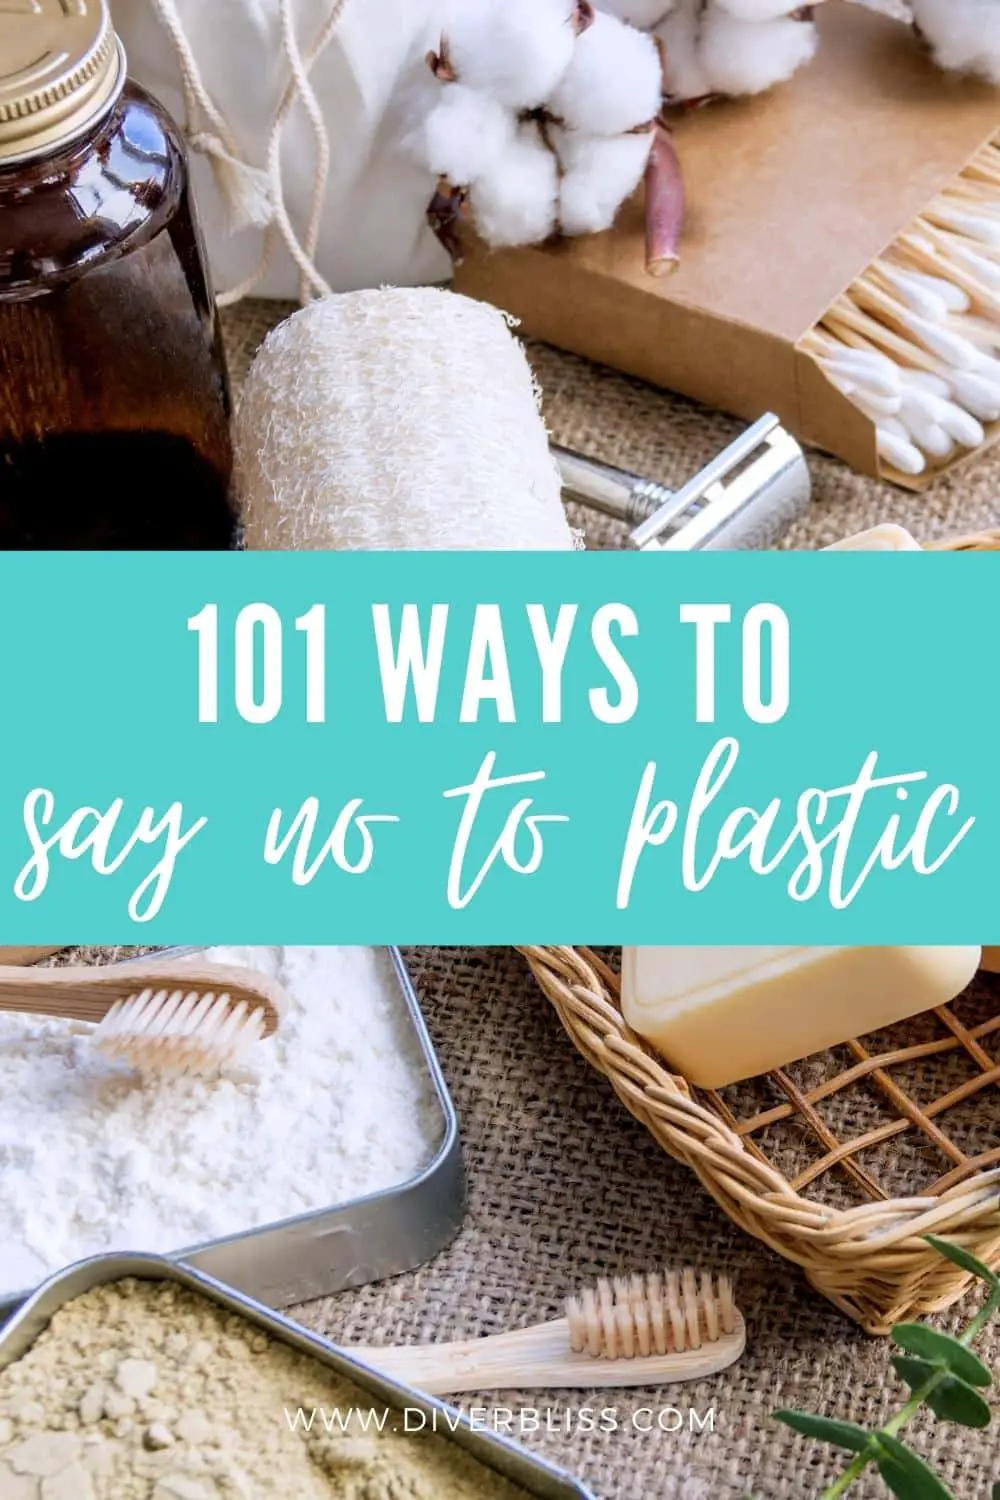 101 ways to say no to plastic